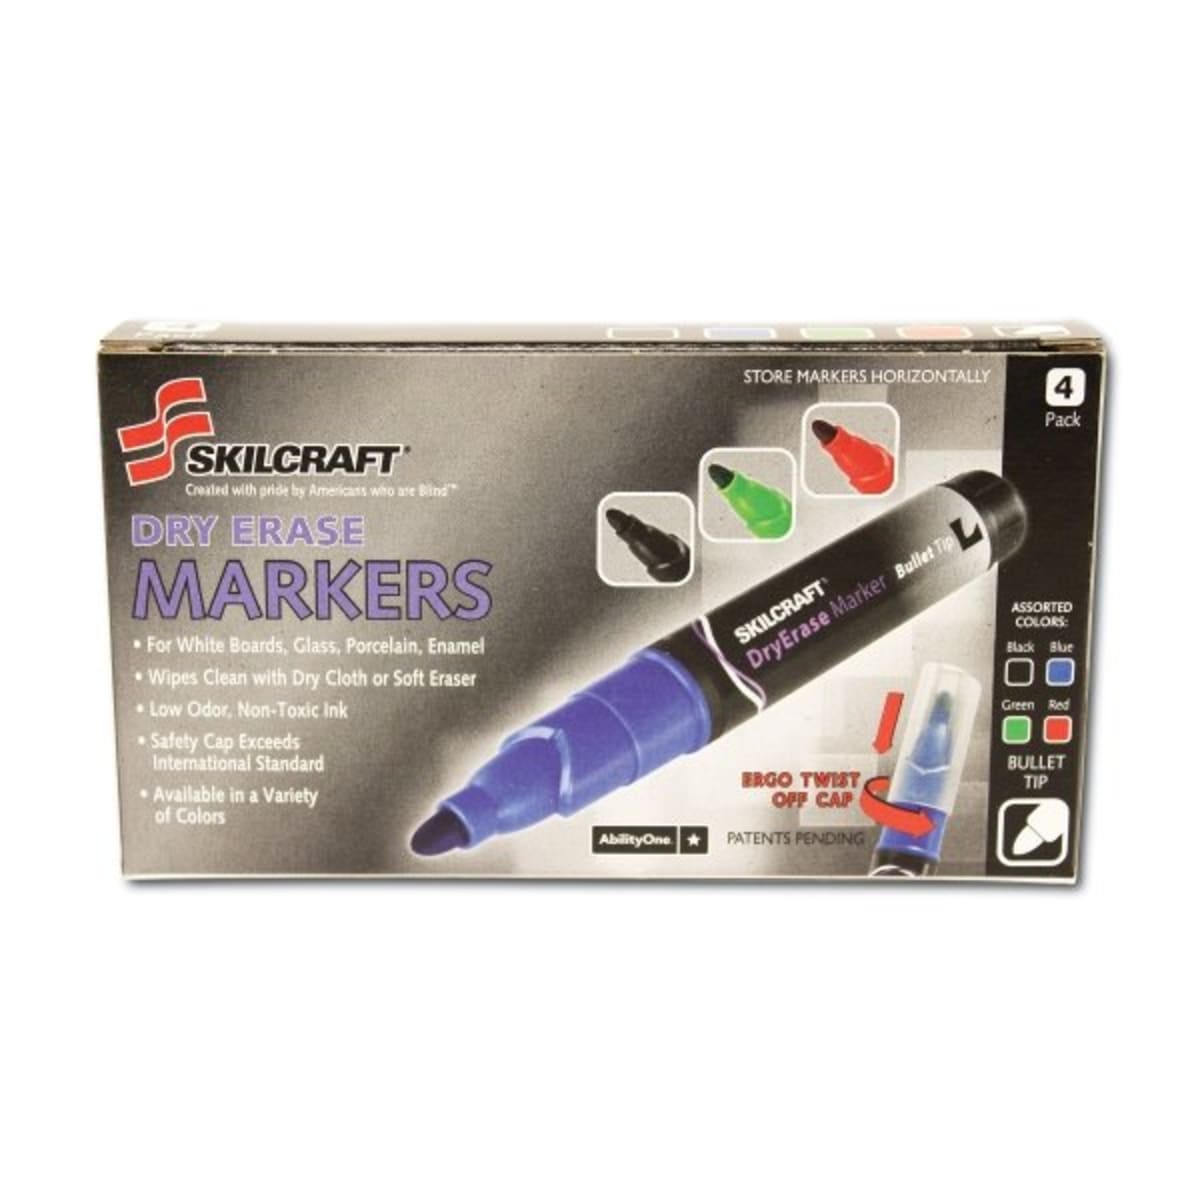 Sharpie Permanent Markers Fine Point Assorted Colors 5/Pack (30653